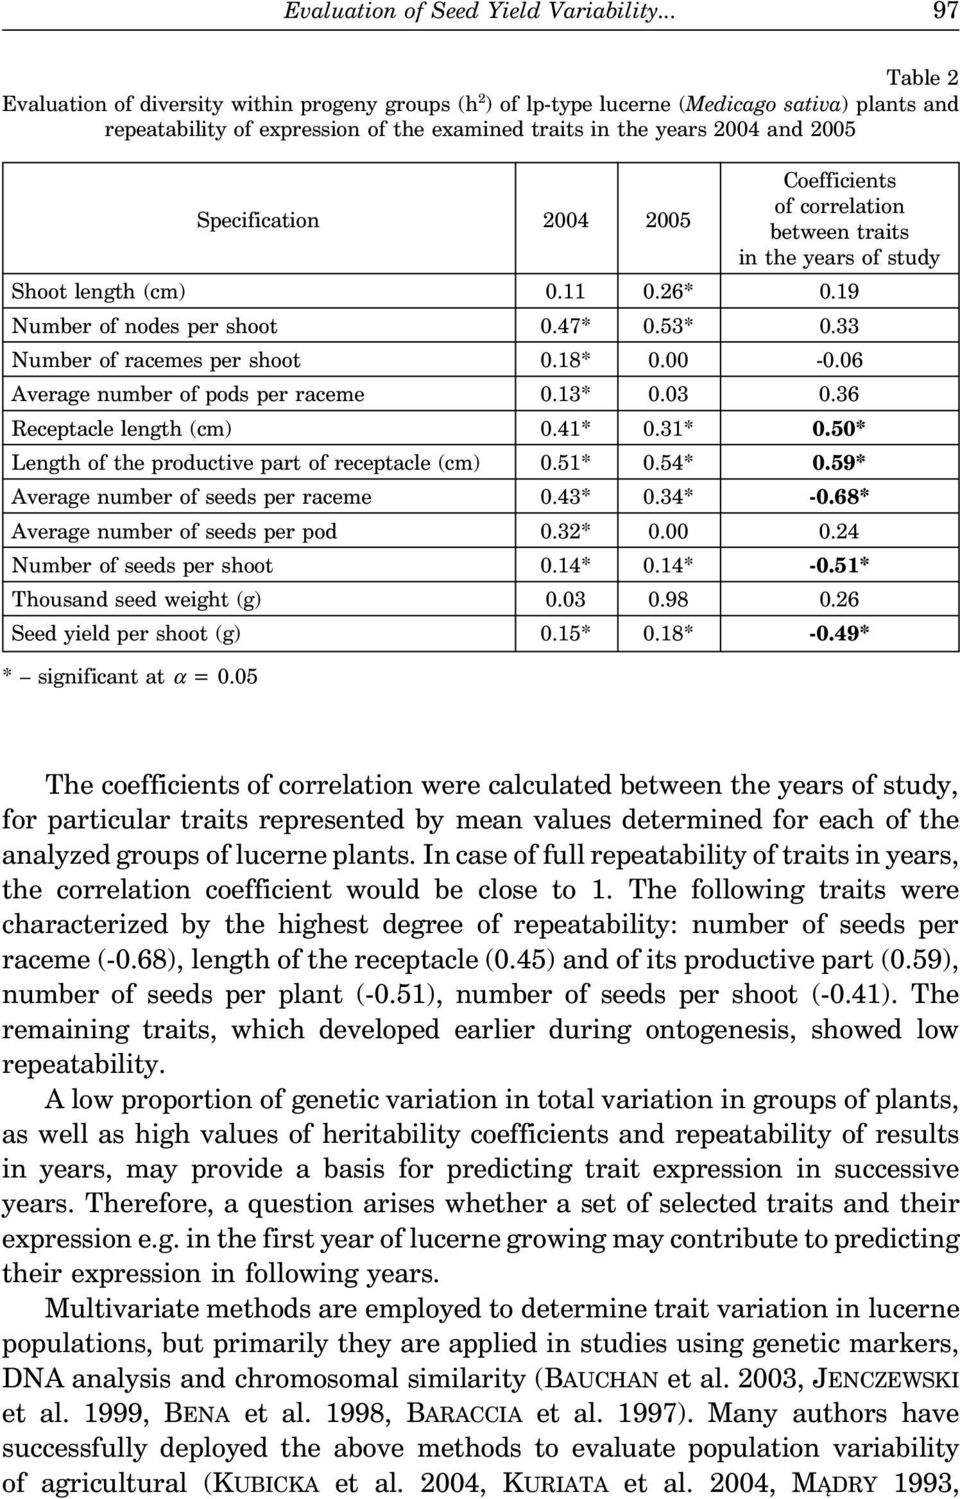 Specification 2004 2005 Coefficients of correlation between traits in the years of study Shoot length (cm) 0.11 0.26* 0.19 Number of nodes per shoot 0.47* 0.53* 0.33 Number of racemes per shoot 0.